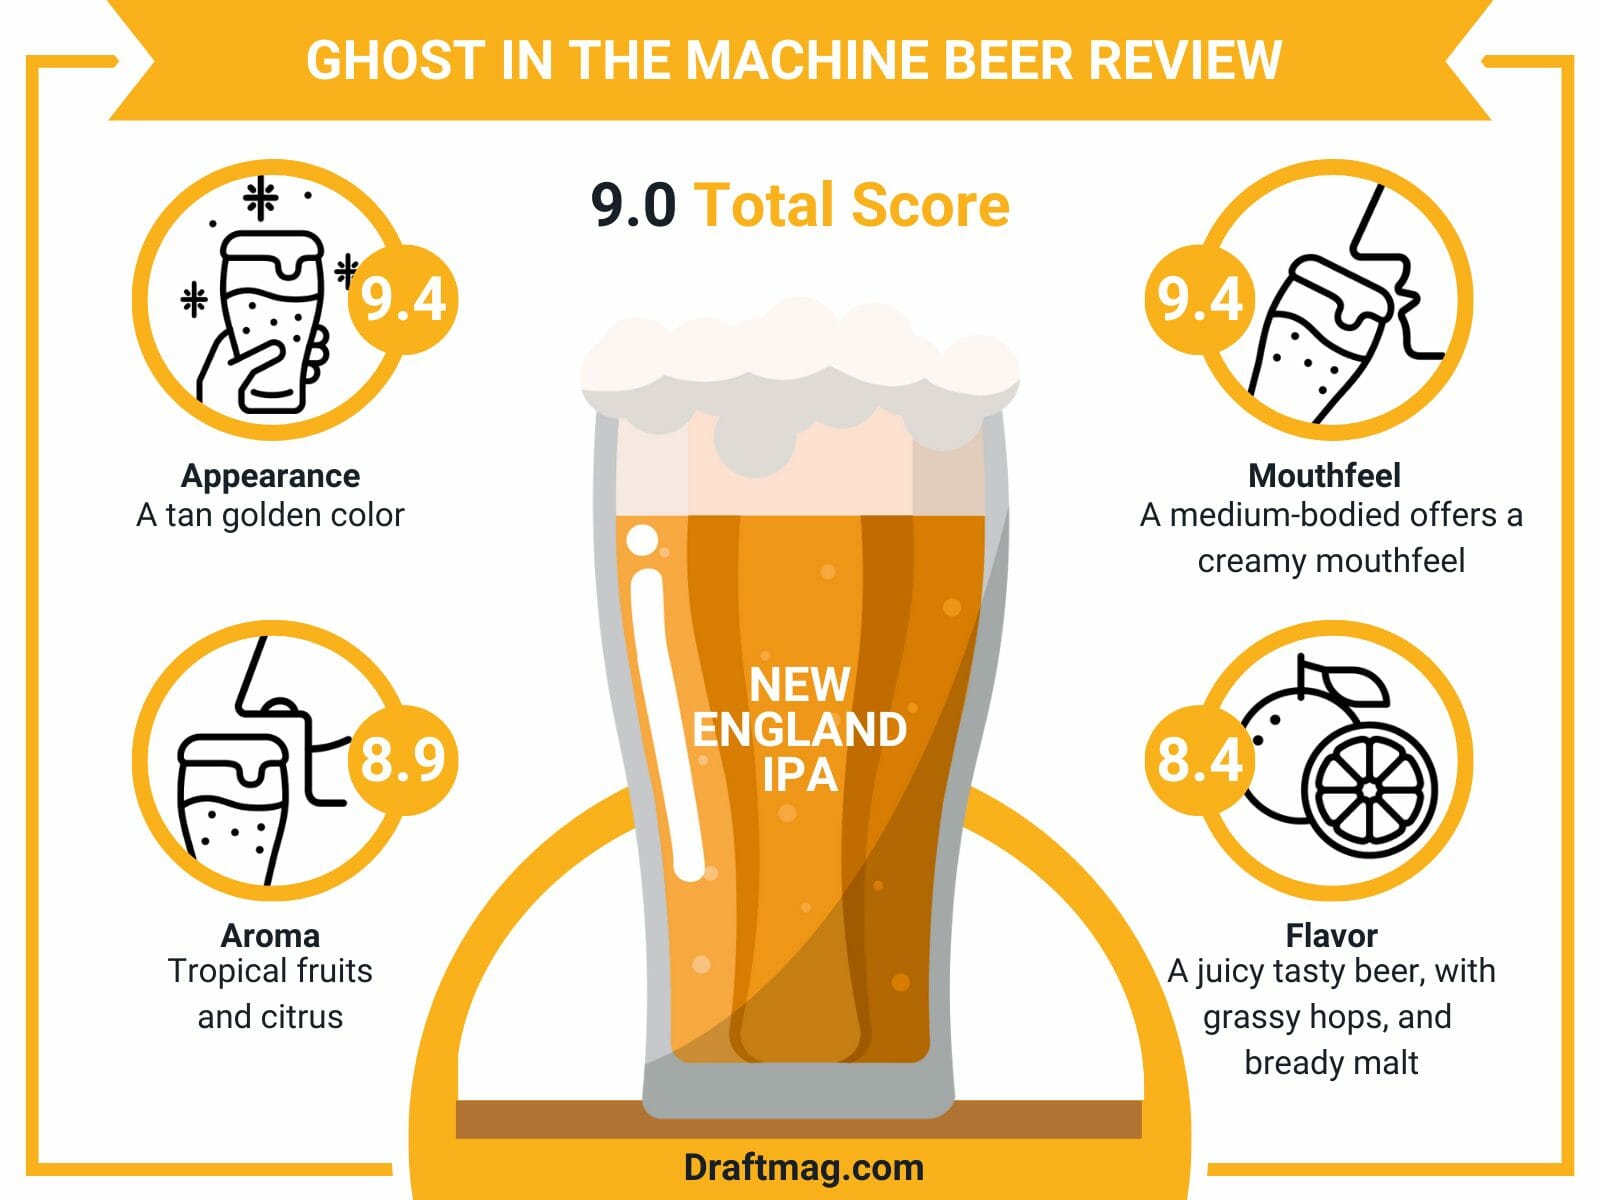 Ghost in the machine beer review infographic